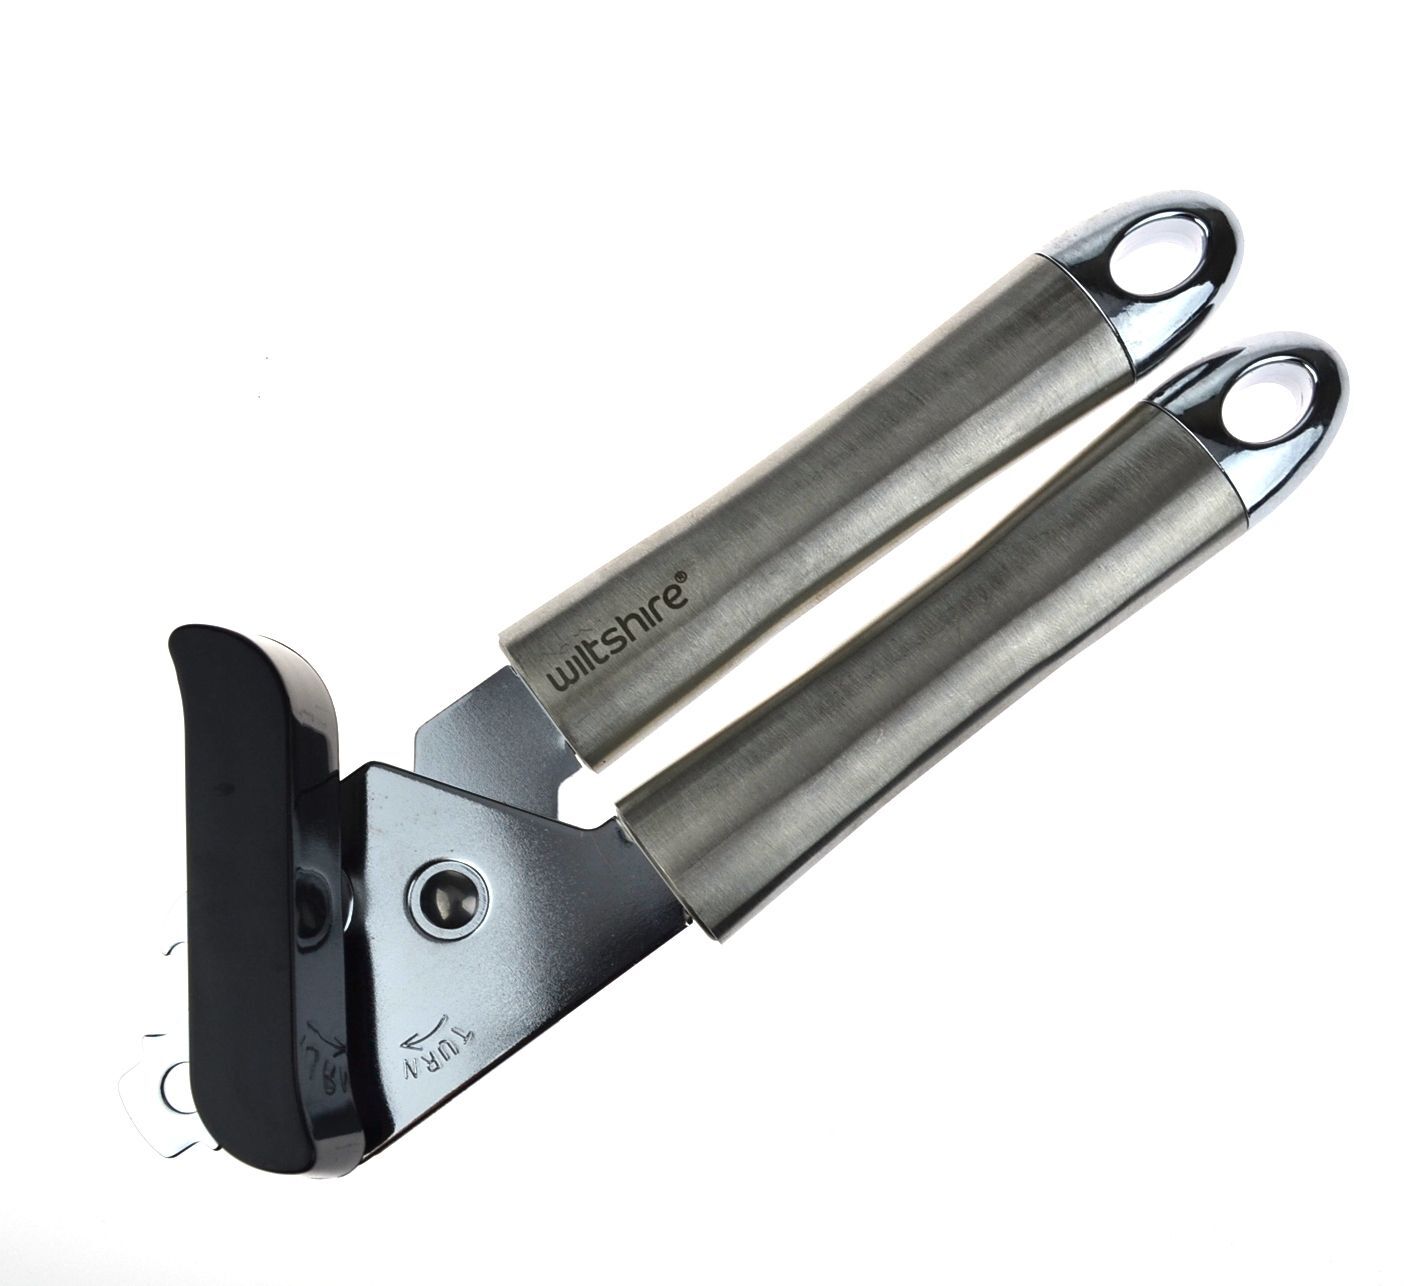 Wiltshire Stainless Steel Can Opener